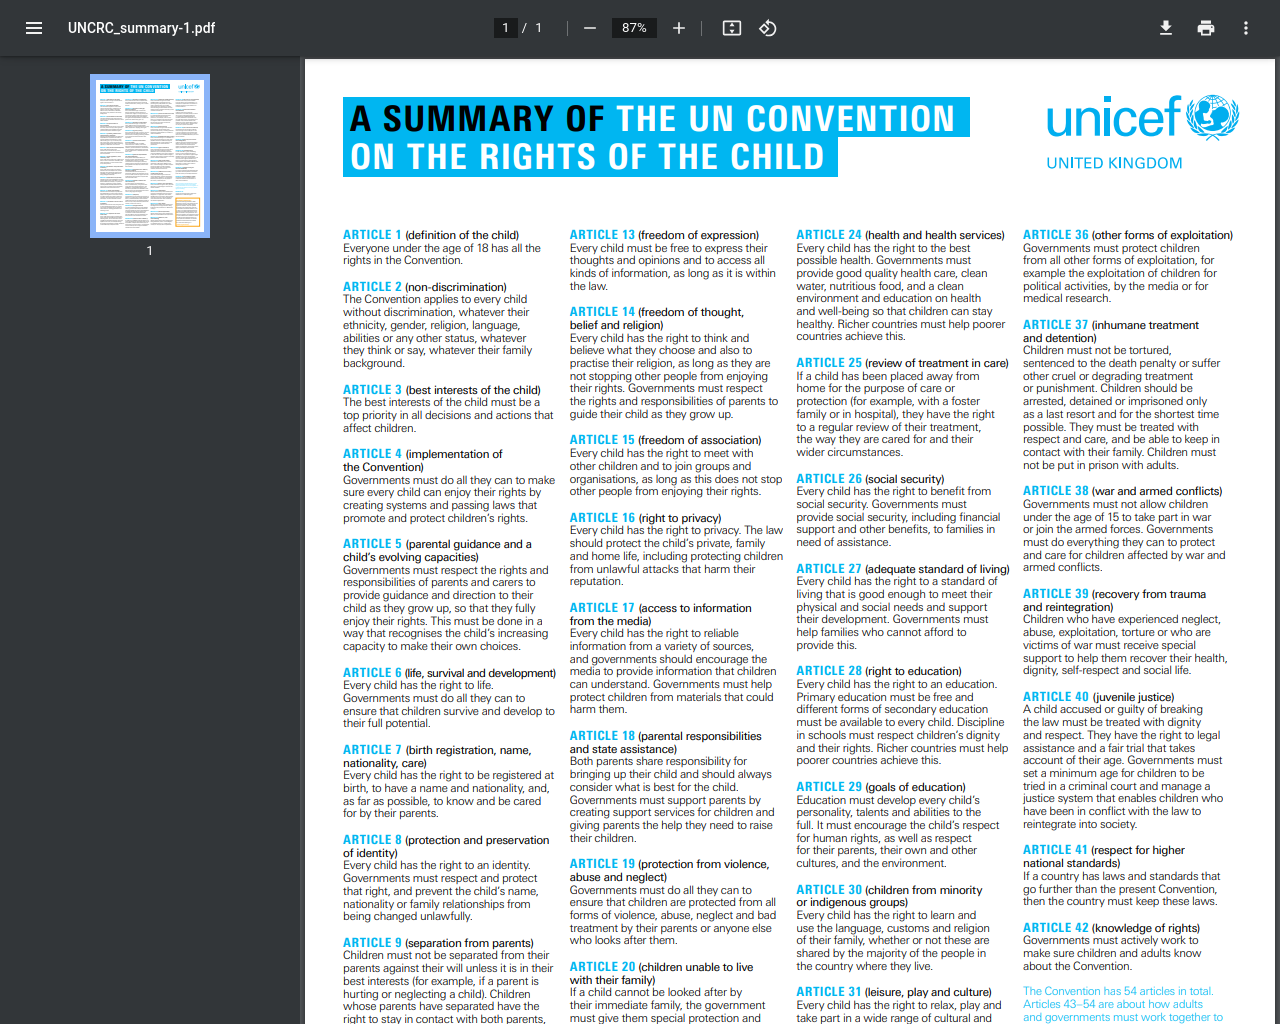 Summary of the Convention on the Rights of the Child